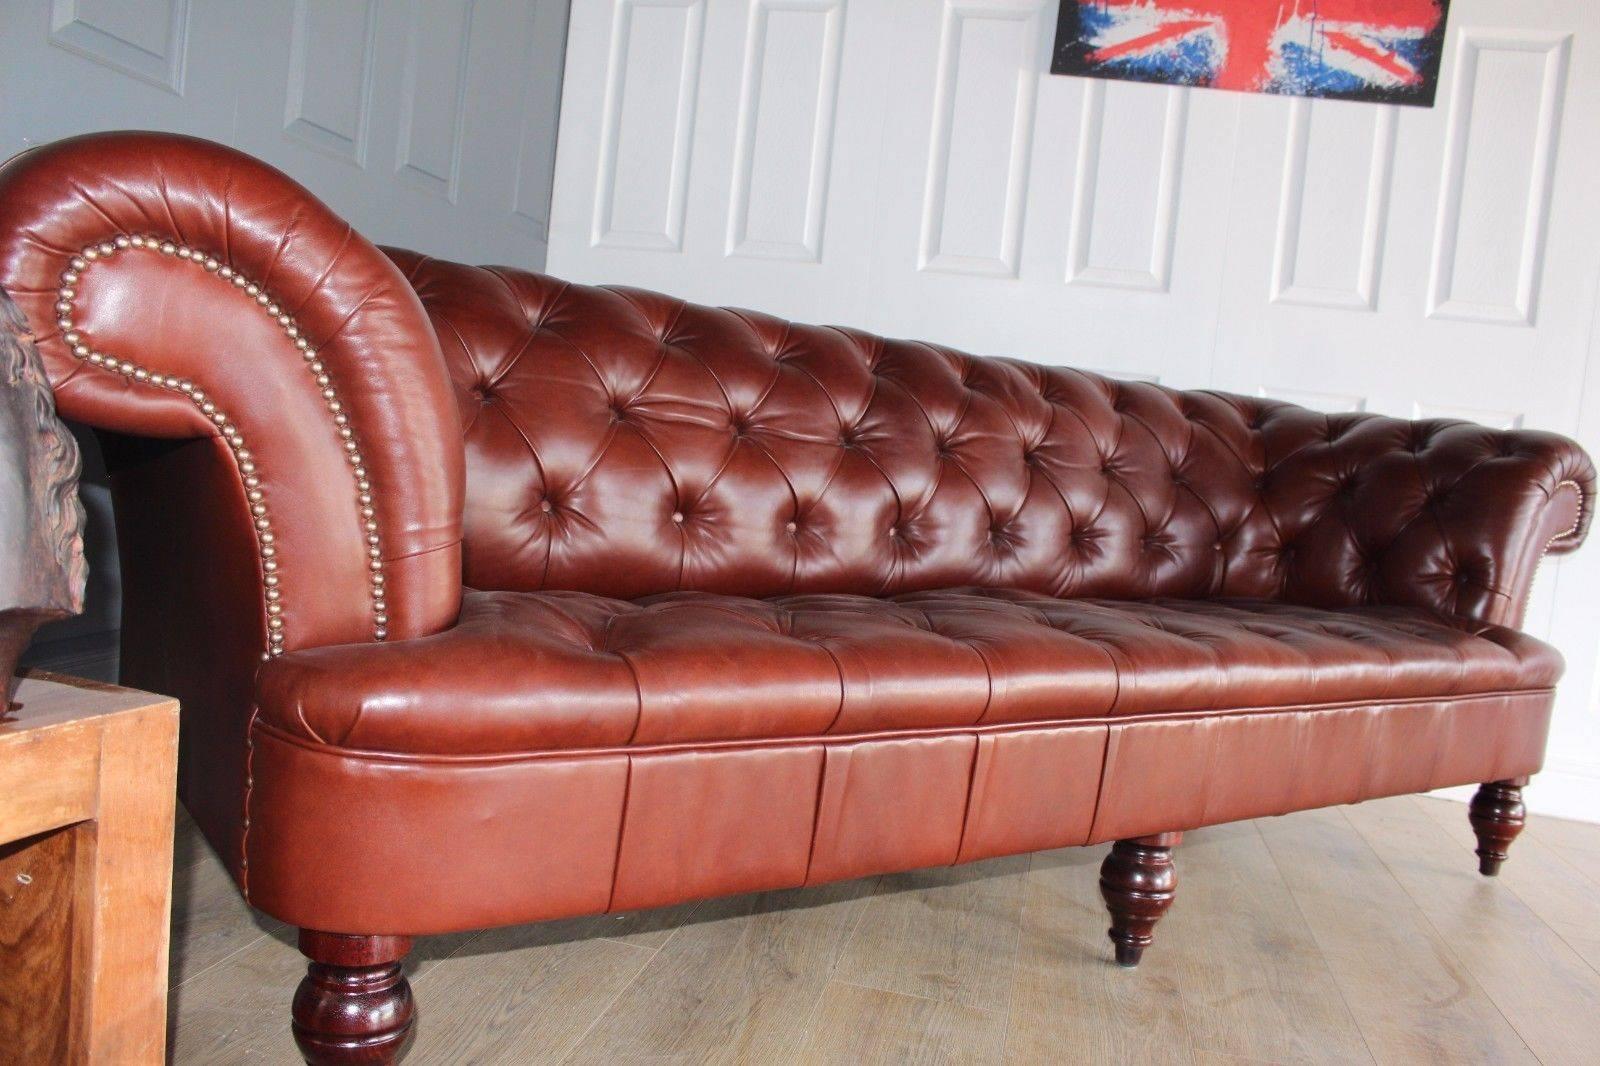 Victorian Genuine Designer George Smith Chesterfield Leather Sofa For Sale